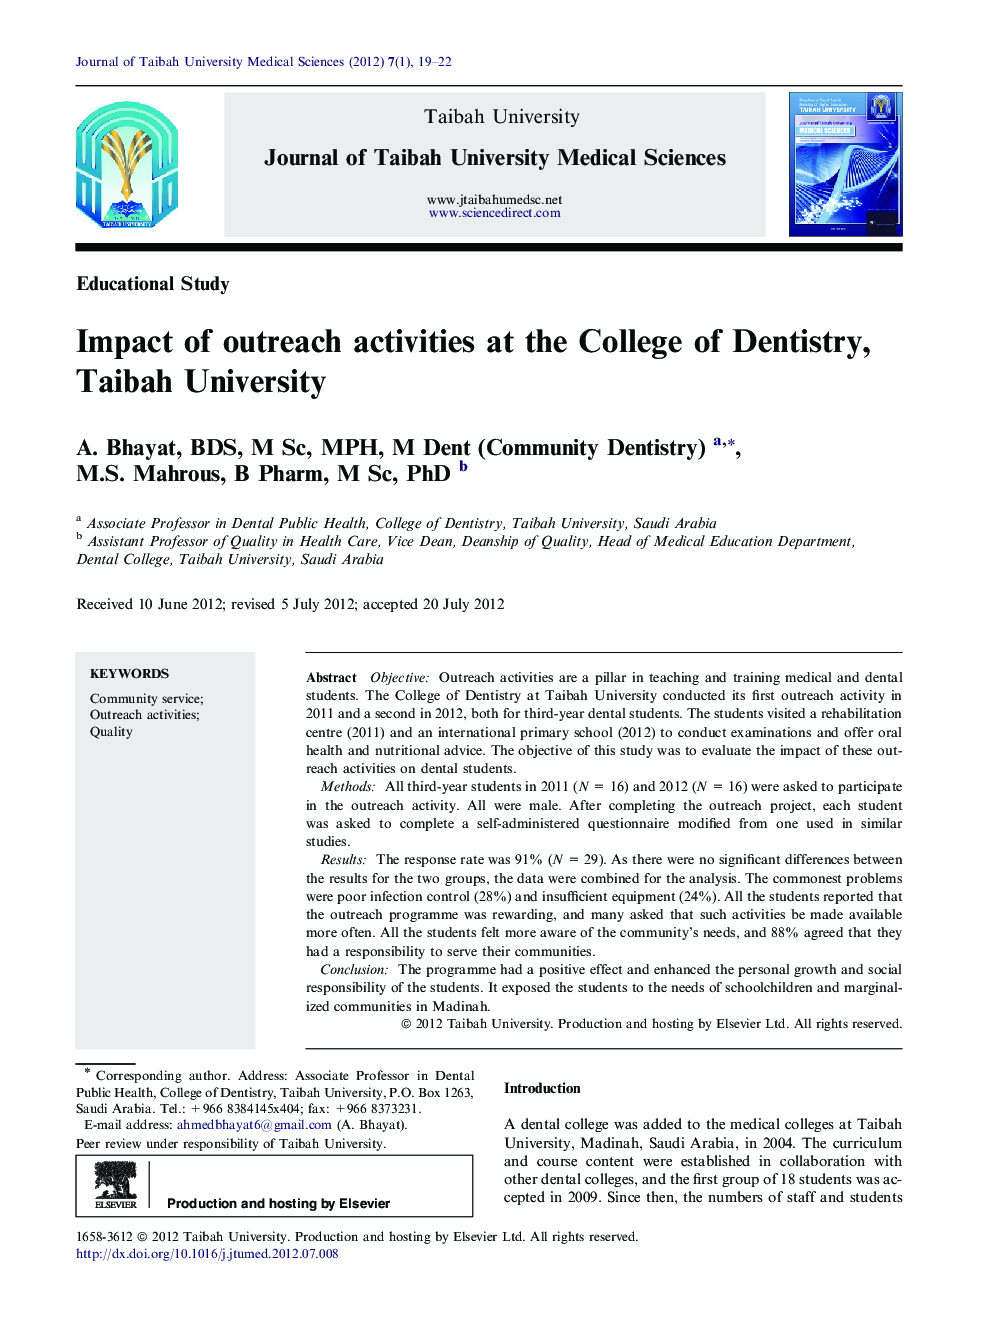 Impact of outreach activities at the College of Dentistry, Taibah University 